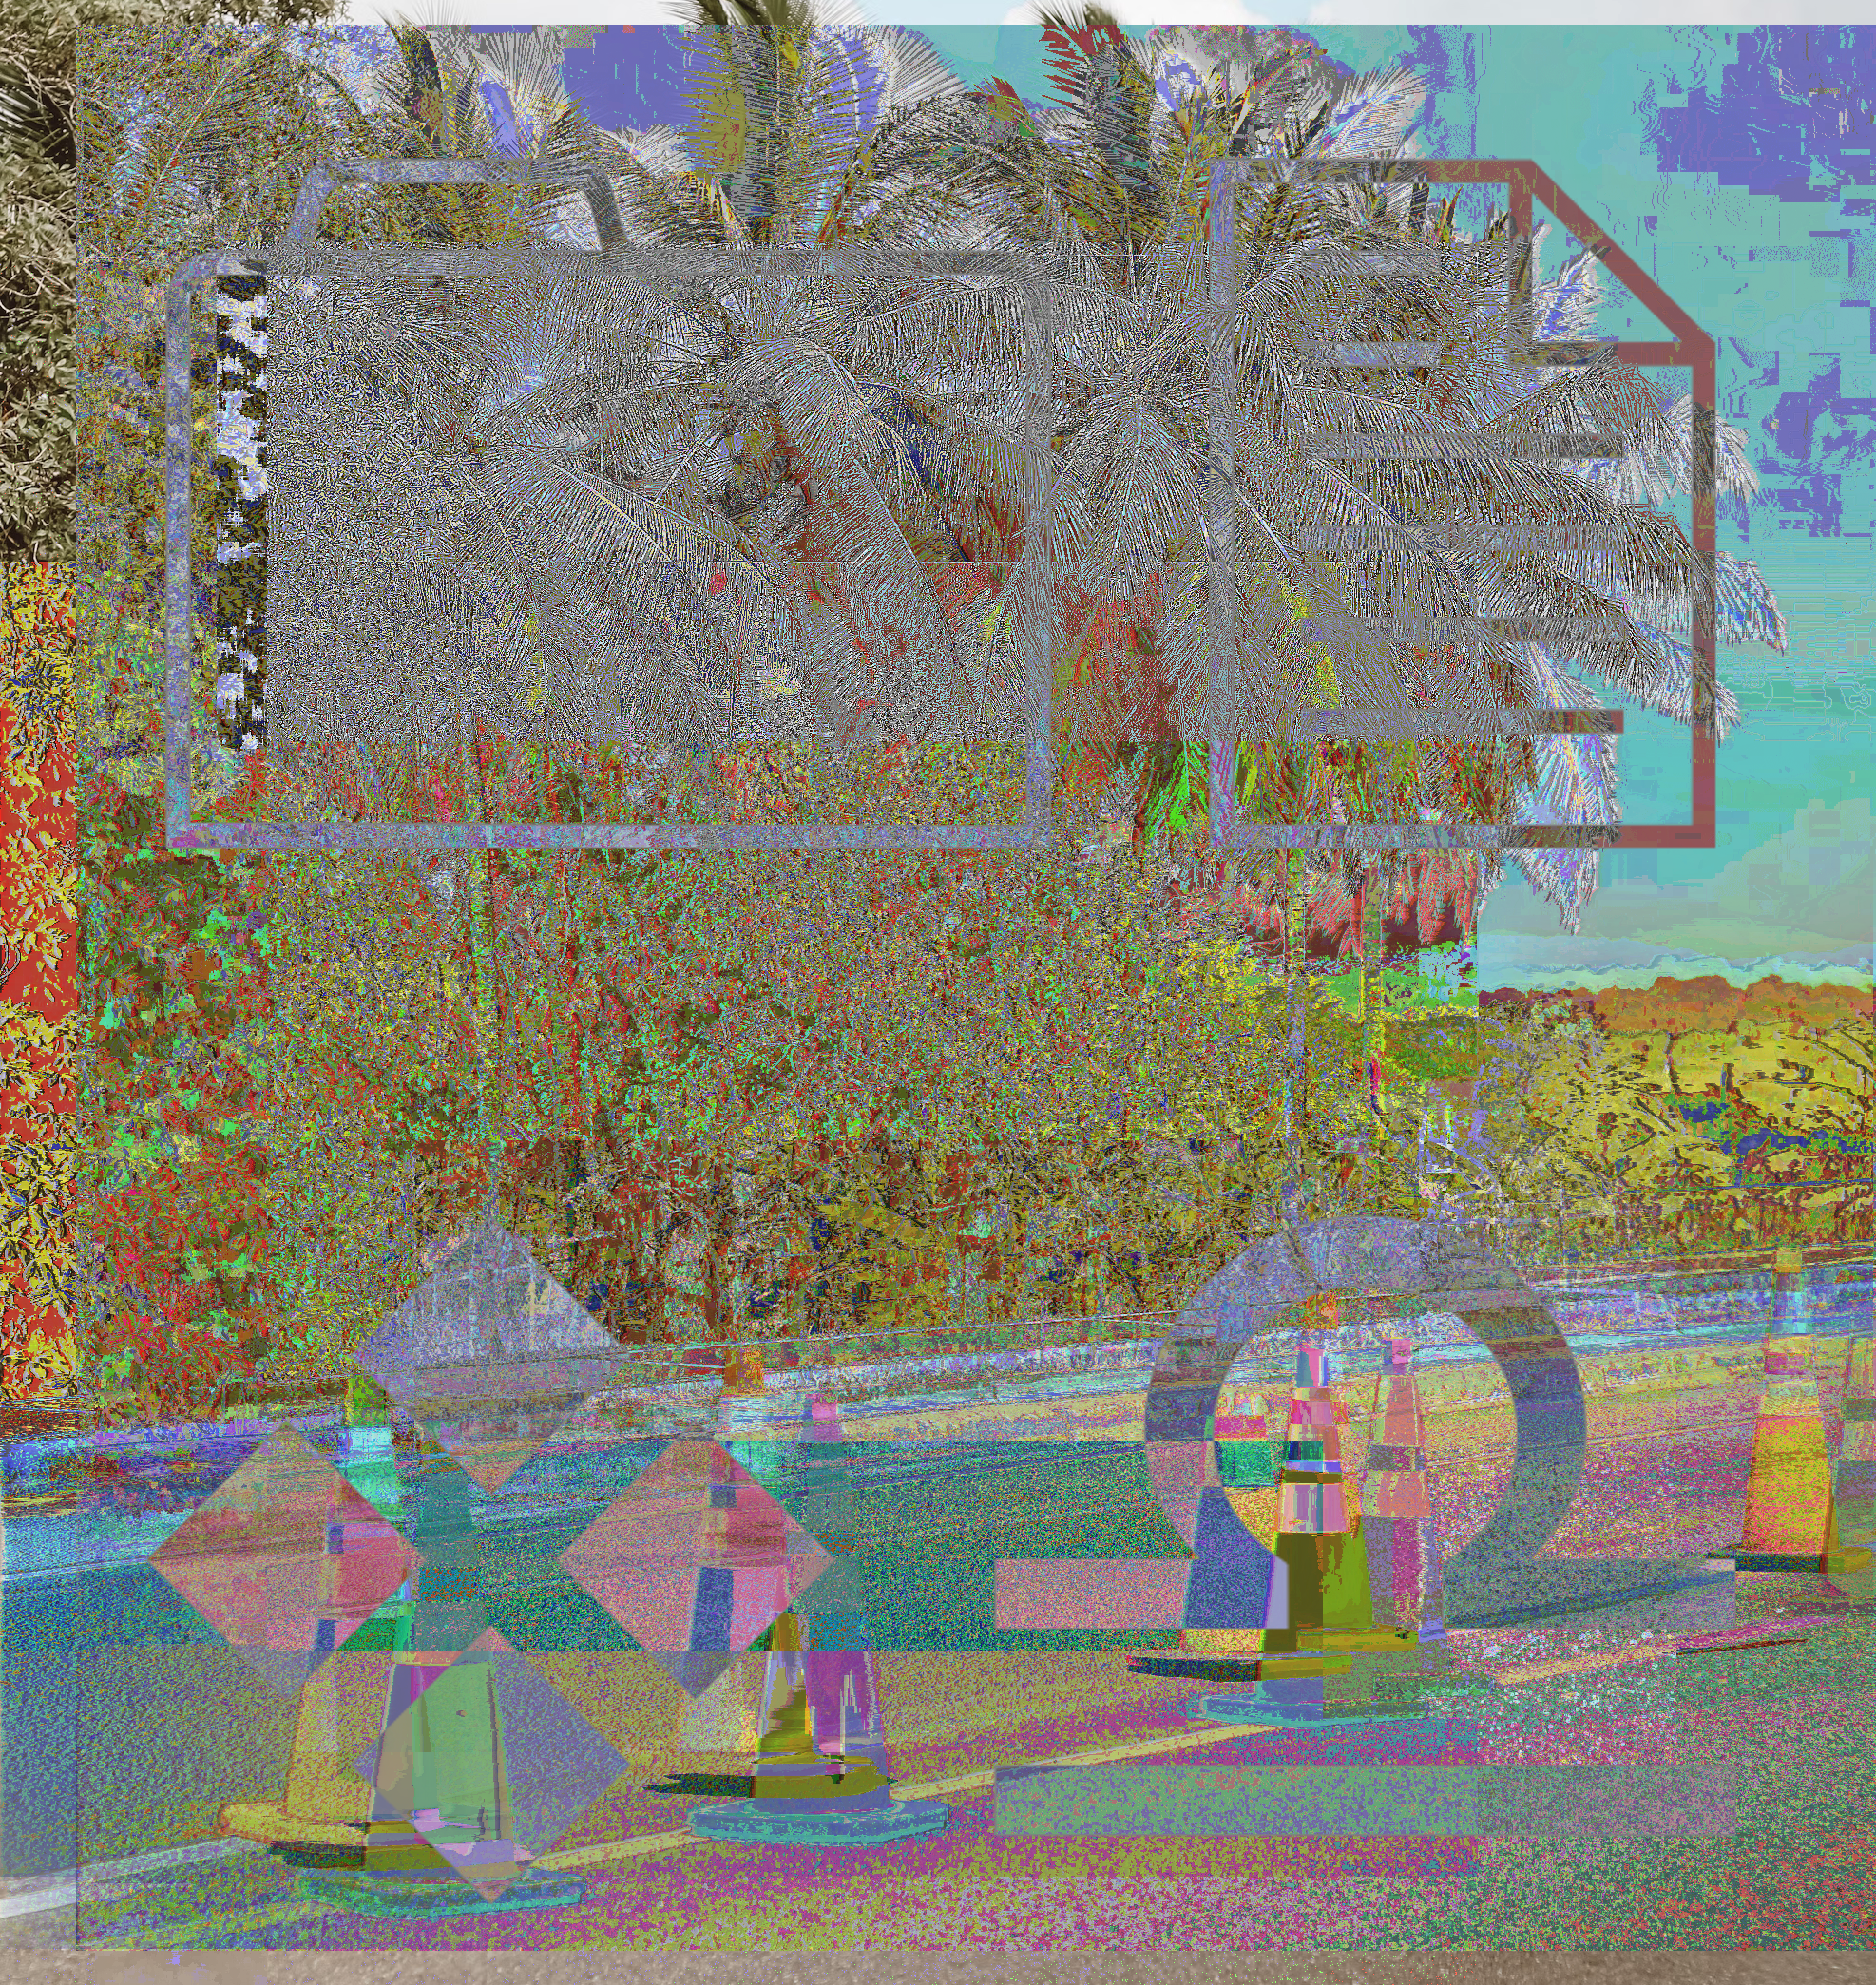 a highly surreal, data-bent portrait of four orange traffic cones. the image is incredibly disorienting, in equal mix of rainbow hues and monochrome, and is comprehensible but comes off as mostly static - it's like touching velcro with your vision. superimposed onto the image is a set of four simplified symbols on a two-by-two grid. from left to right and top to bottom, these symbols are: a closed folder; a page with a folded top-right corner and lines imitating text on it; four diamonds arranged into the shape of a larger diamond; and the glyph for the Zodiac sign Libra.